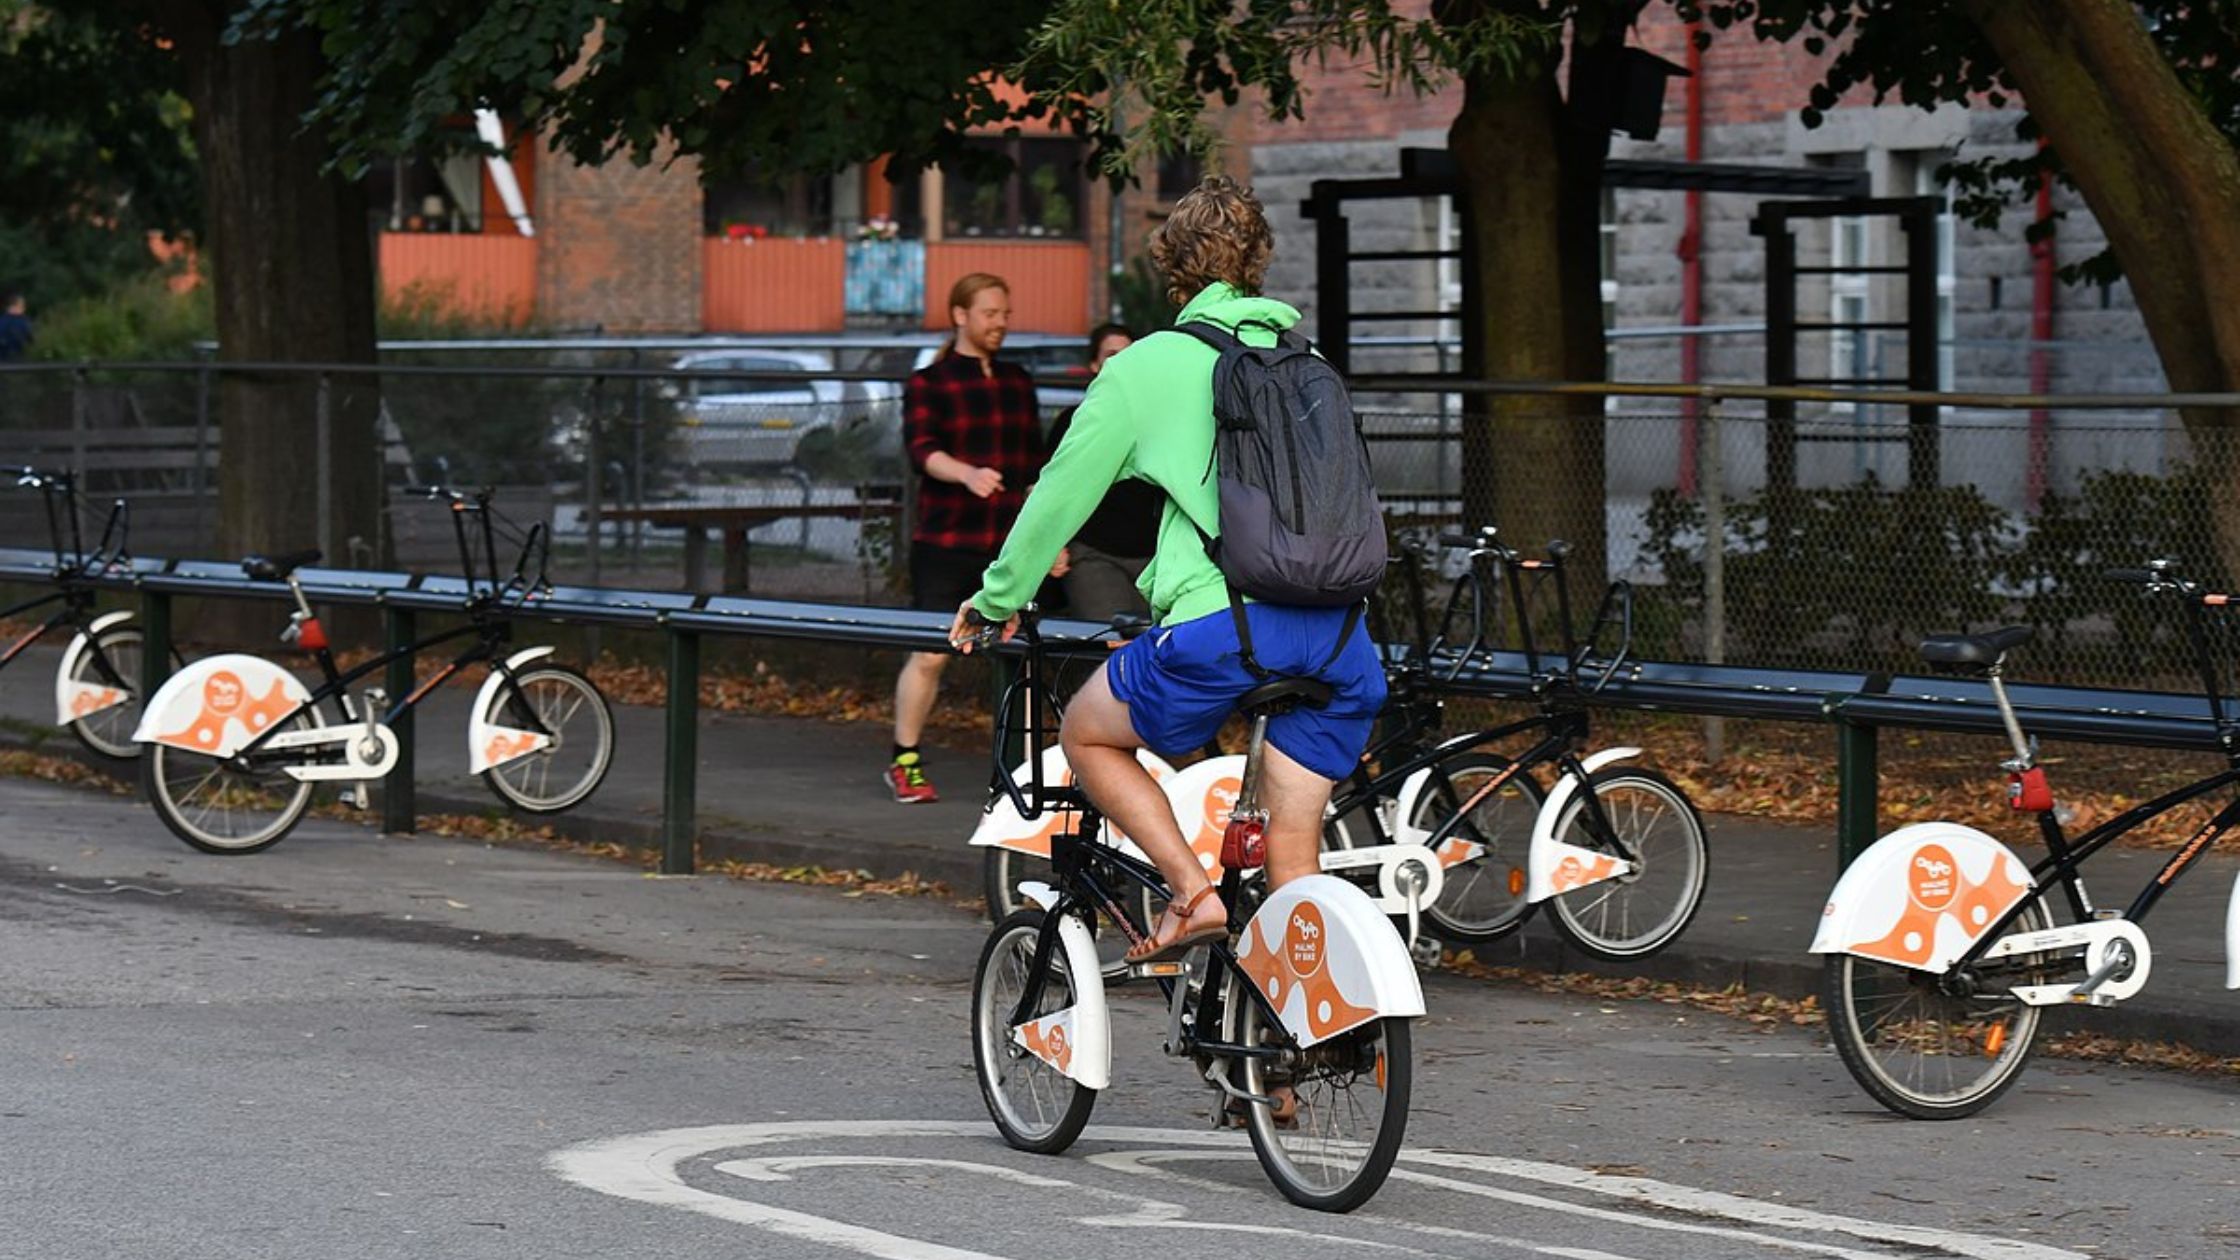 A guy taking abike tour in Malmo